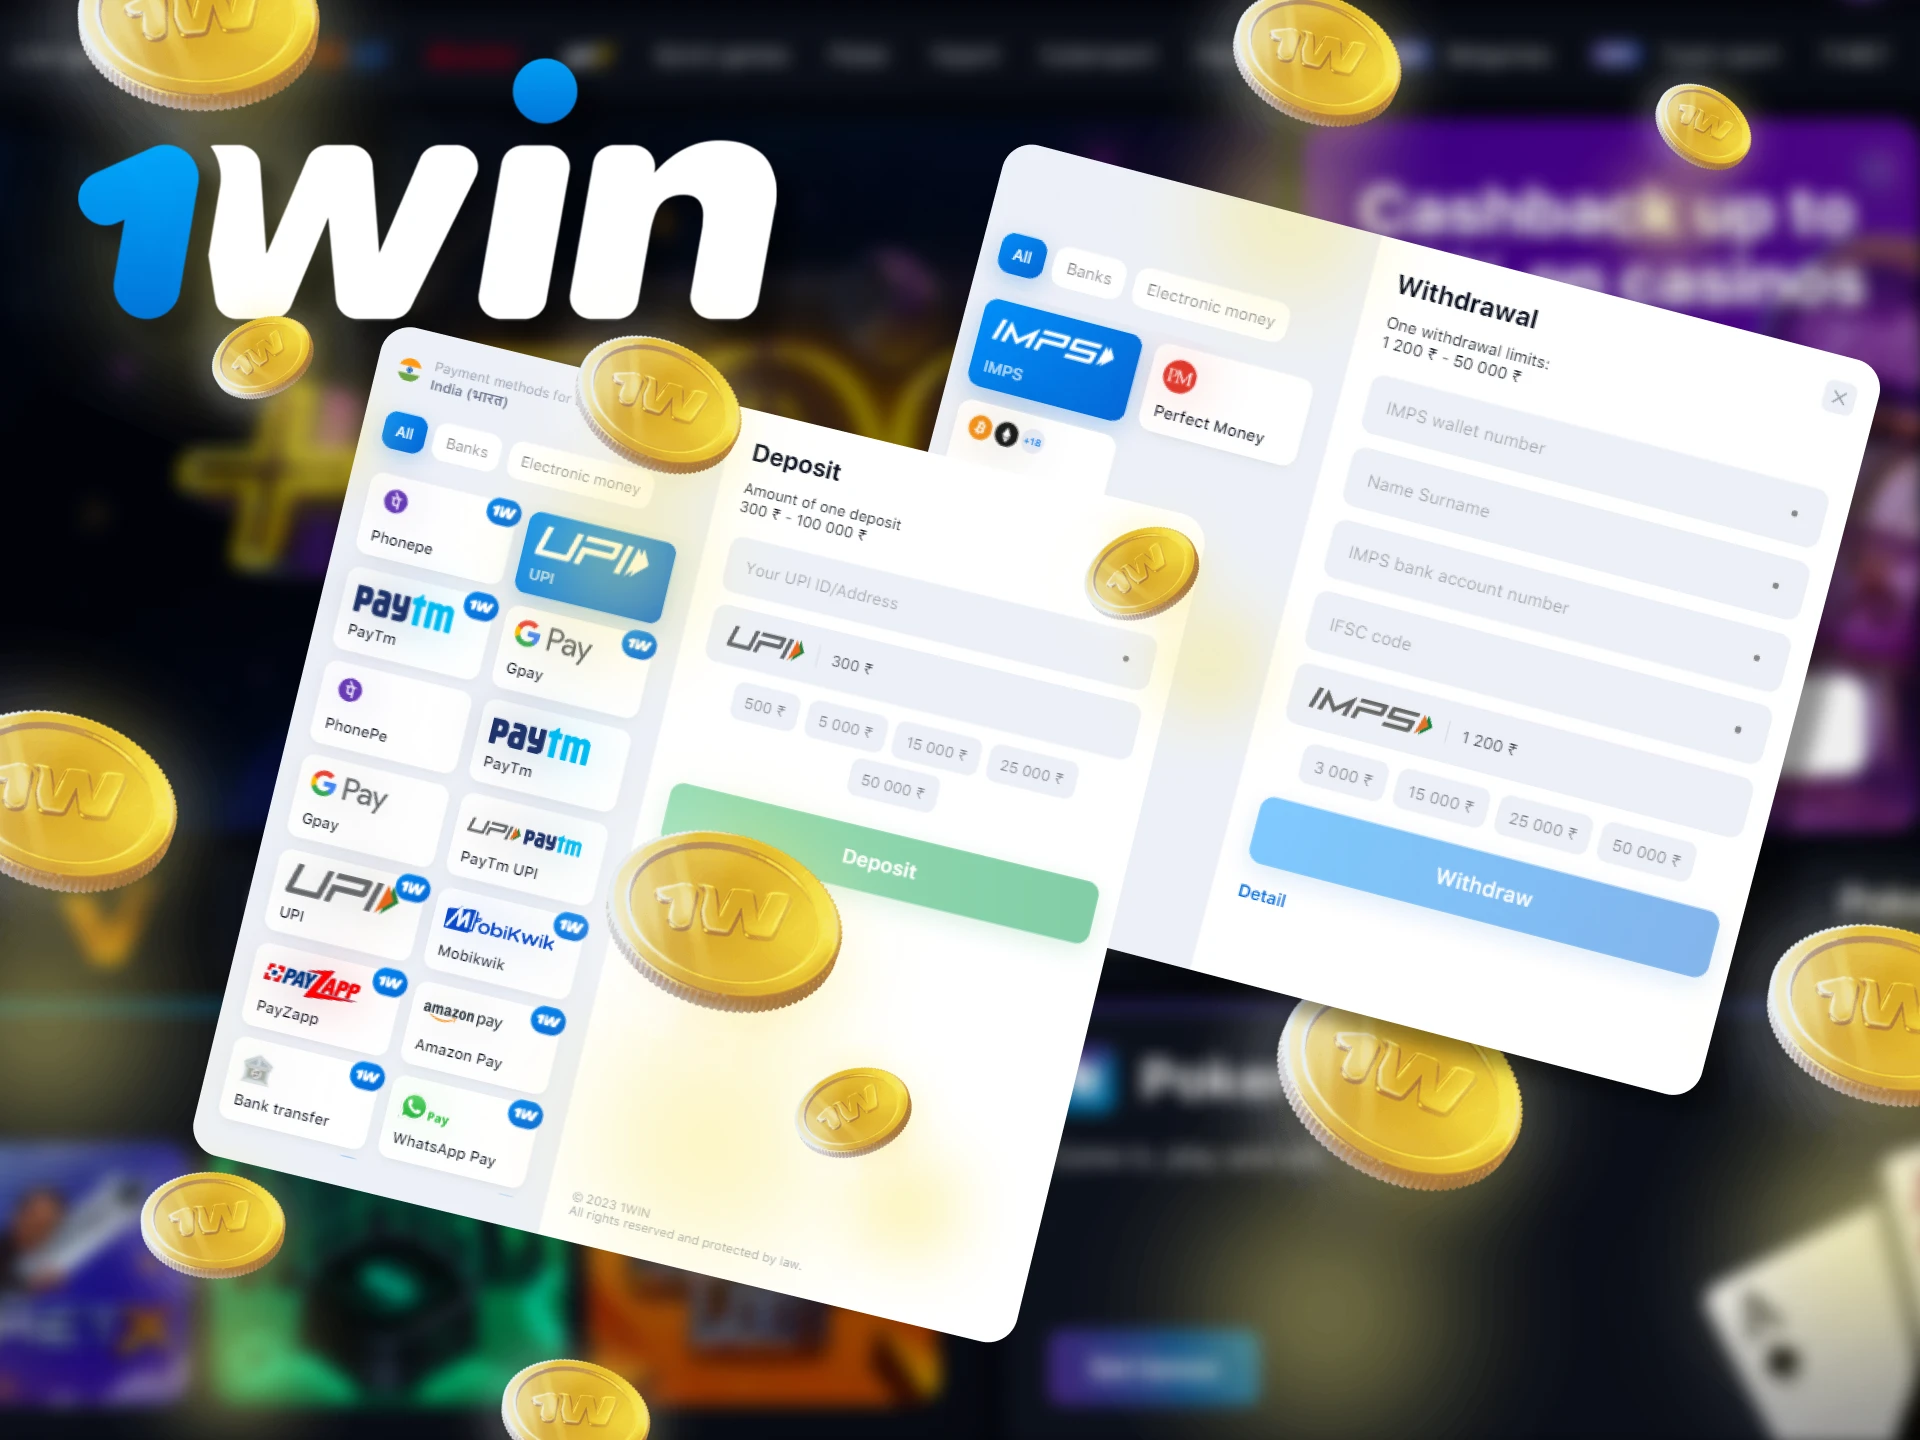 You can easily deposit and withdraw funds from Twain Sports betting at 1Win.